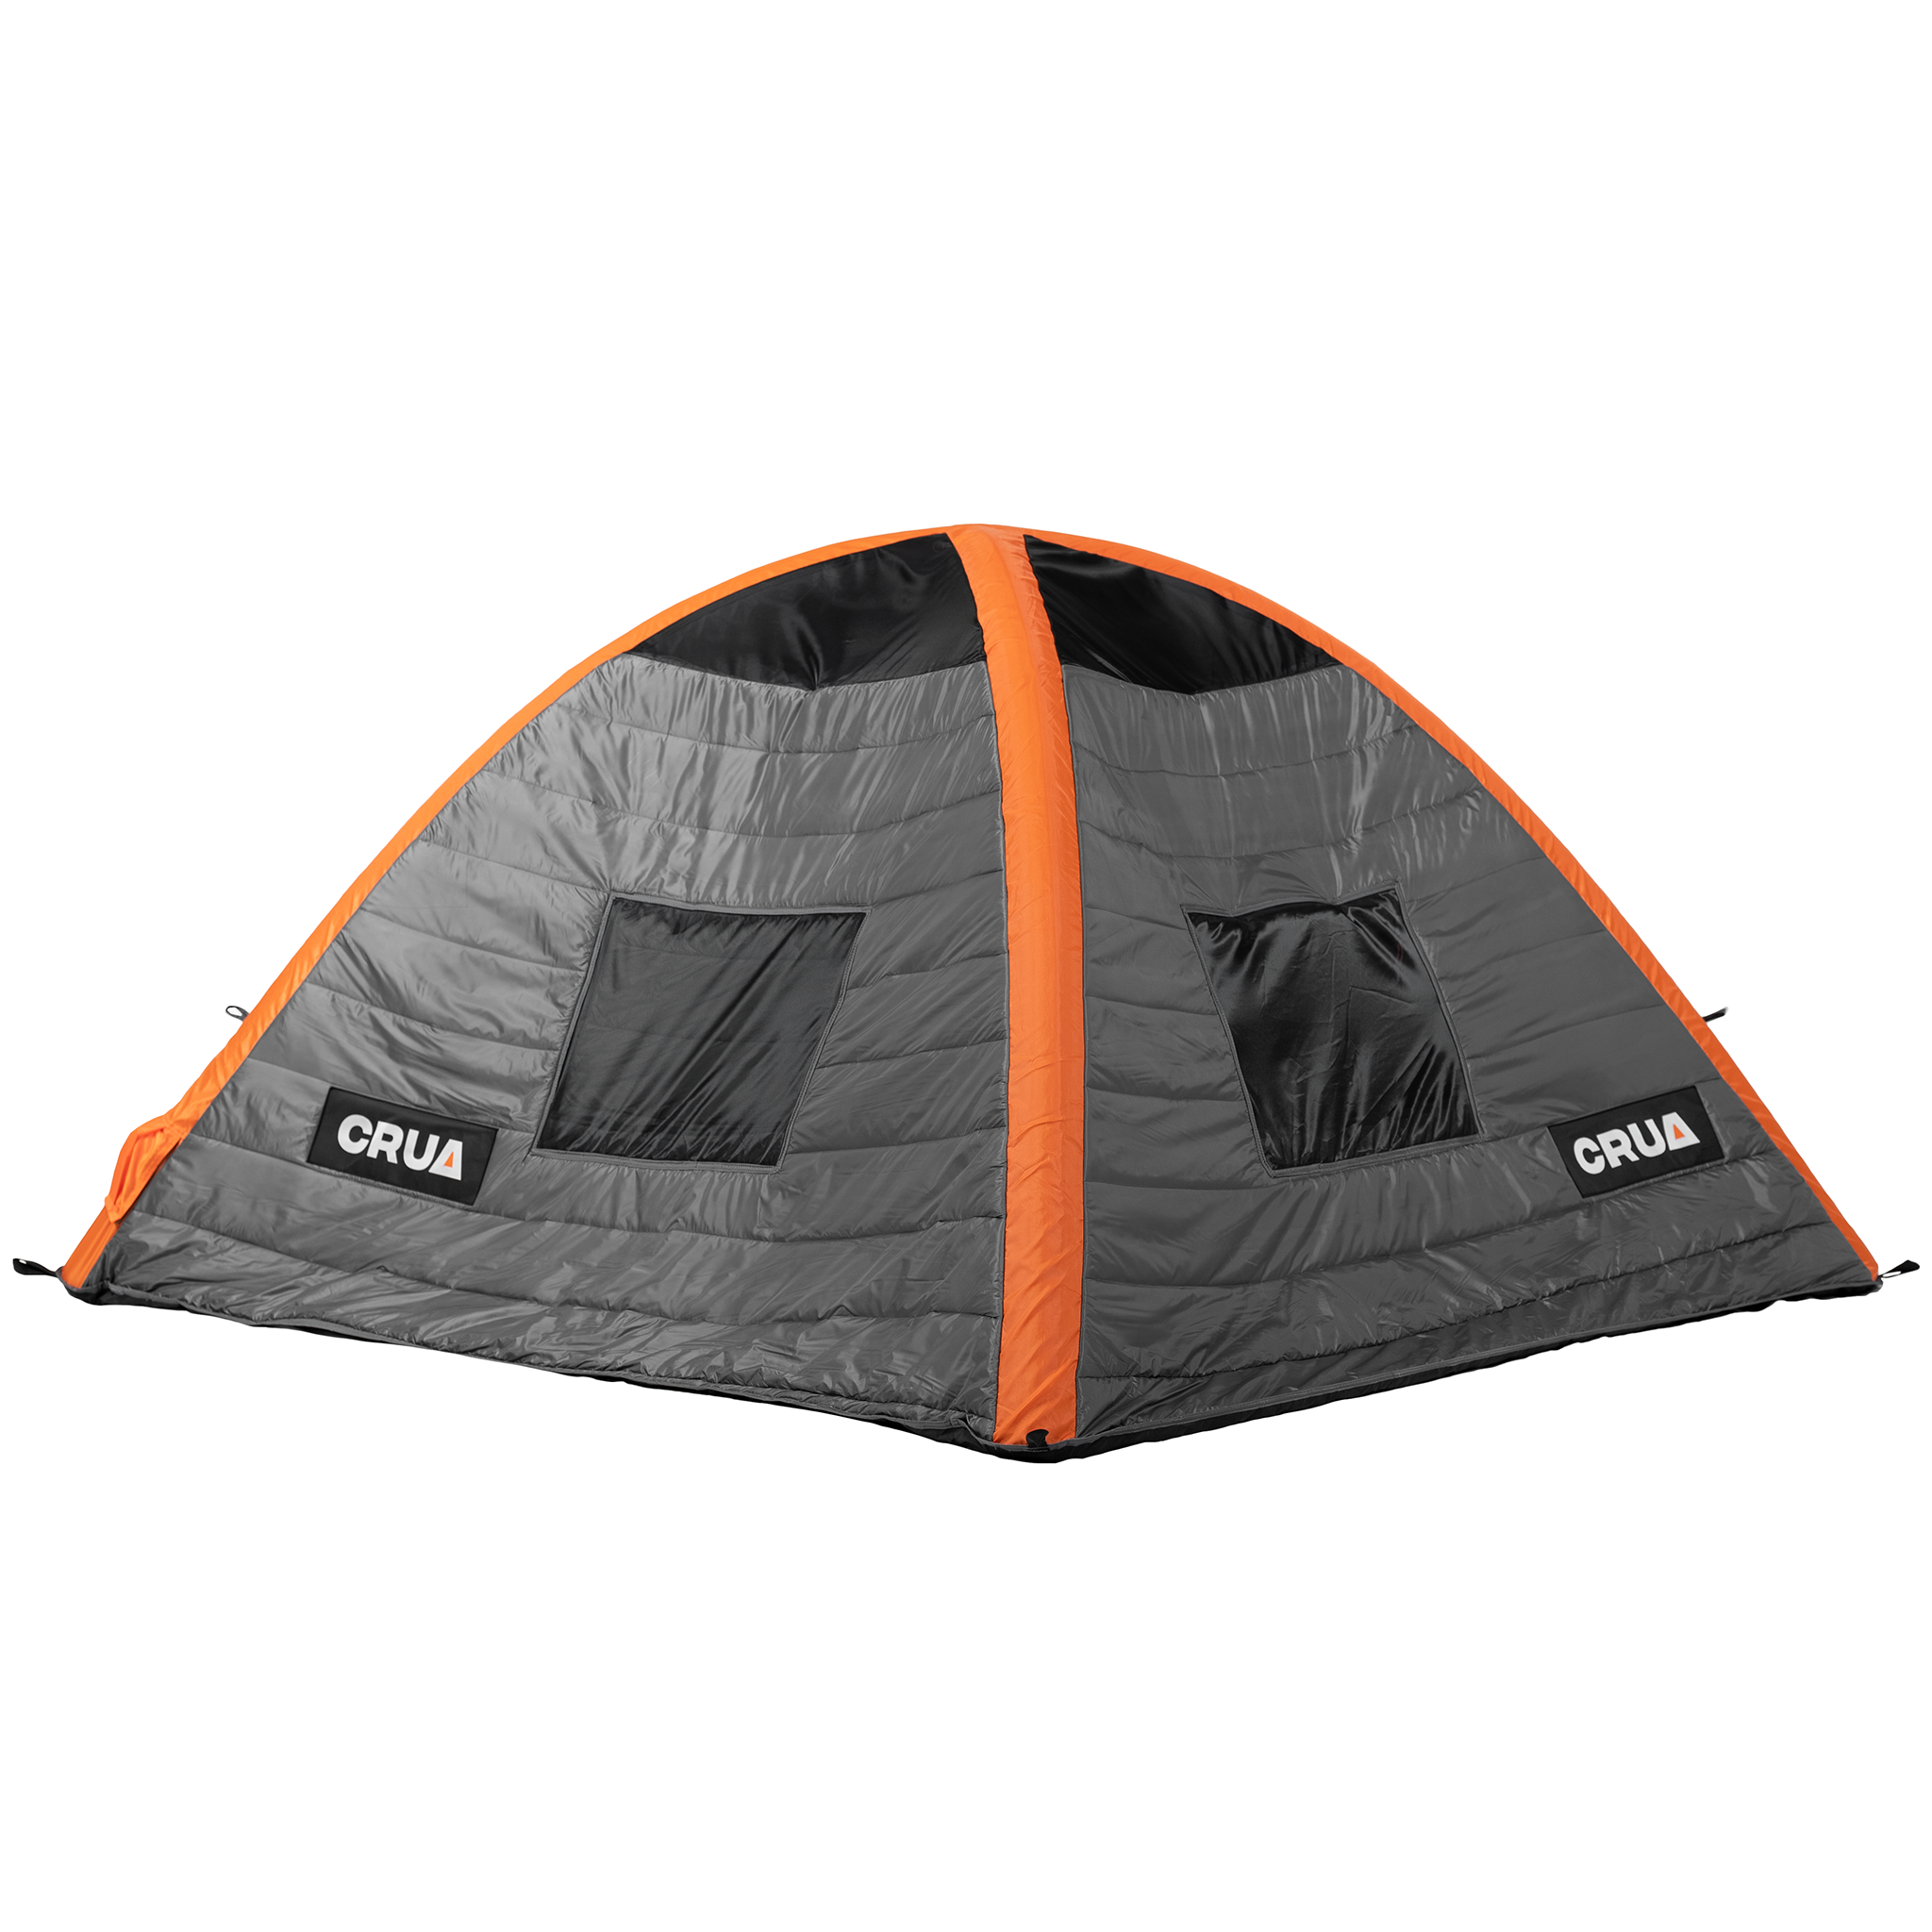 Crucoon | 3 Person Insulated Inner Tent With Temperature Regulating, Noise Dampening And Light Blocking Features | Graphene Infused Insulation For Lightweight Design